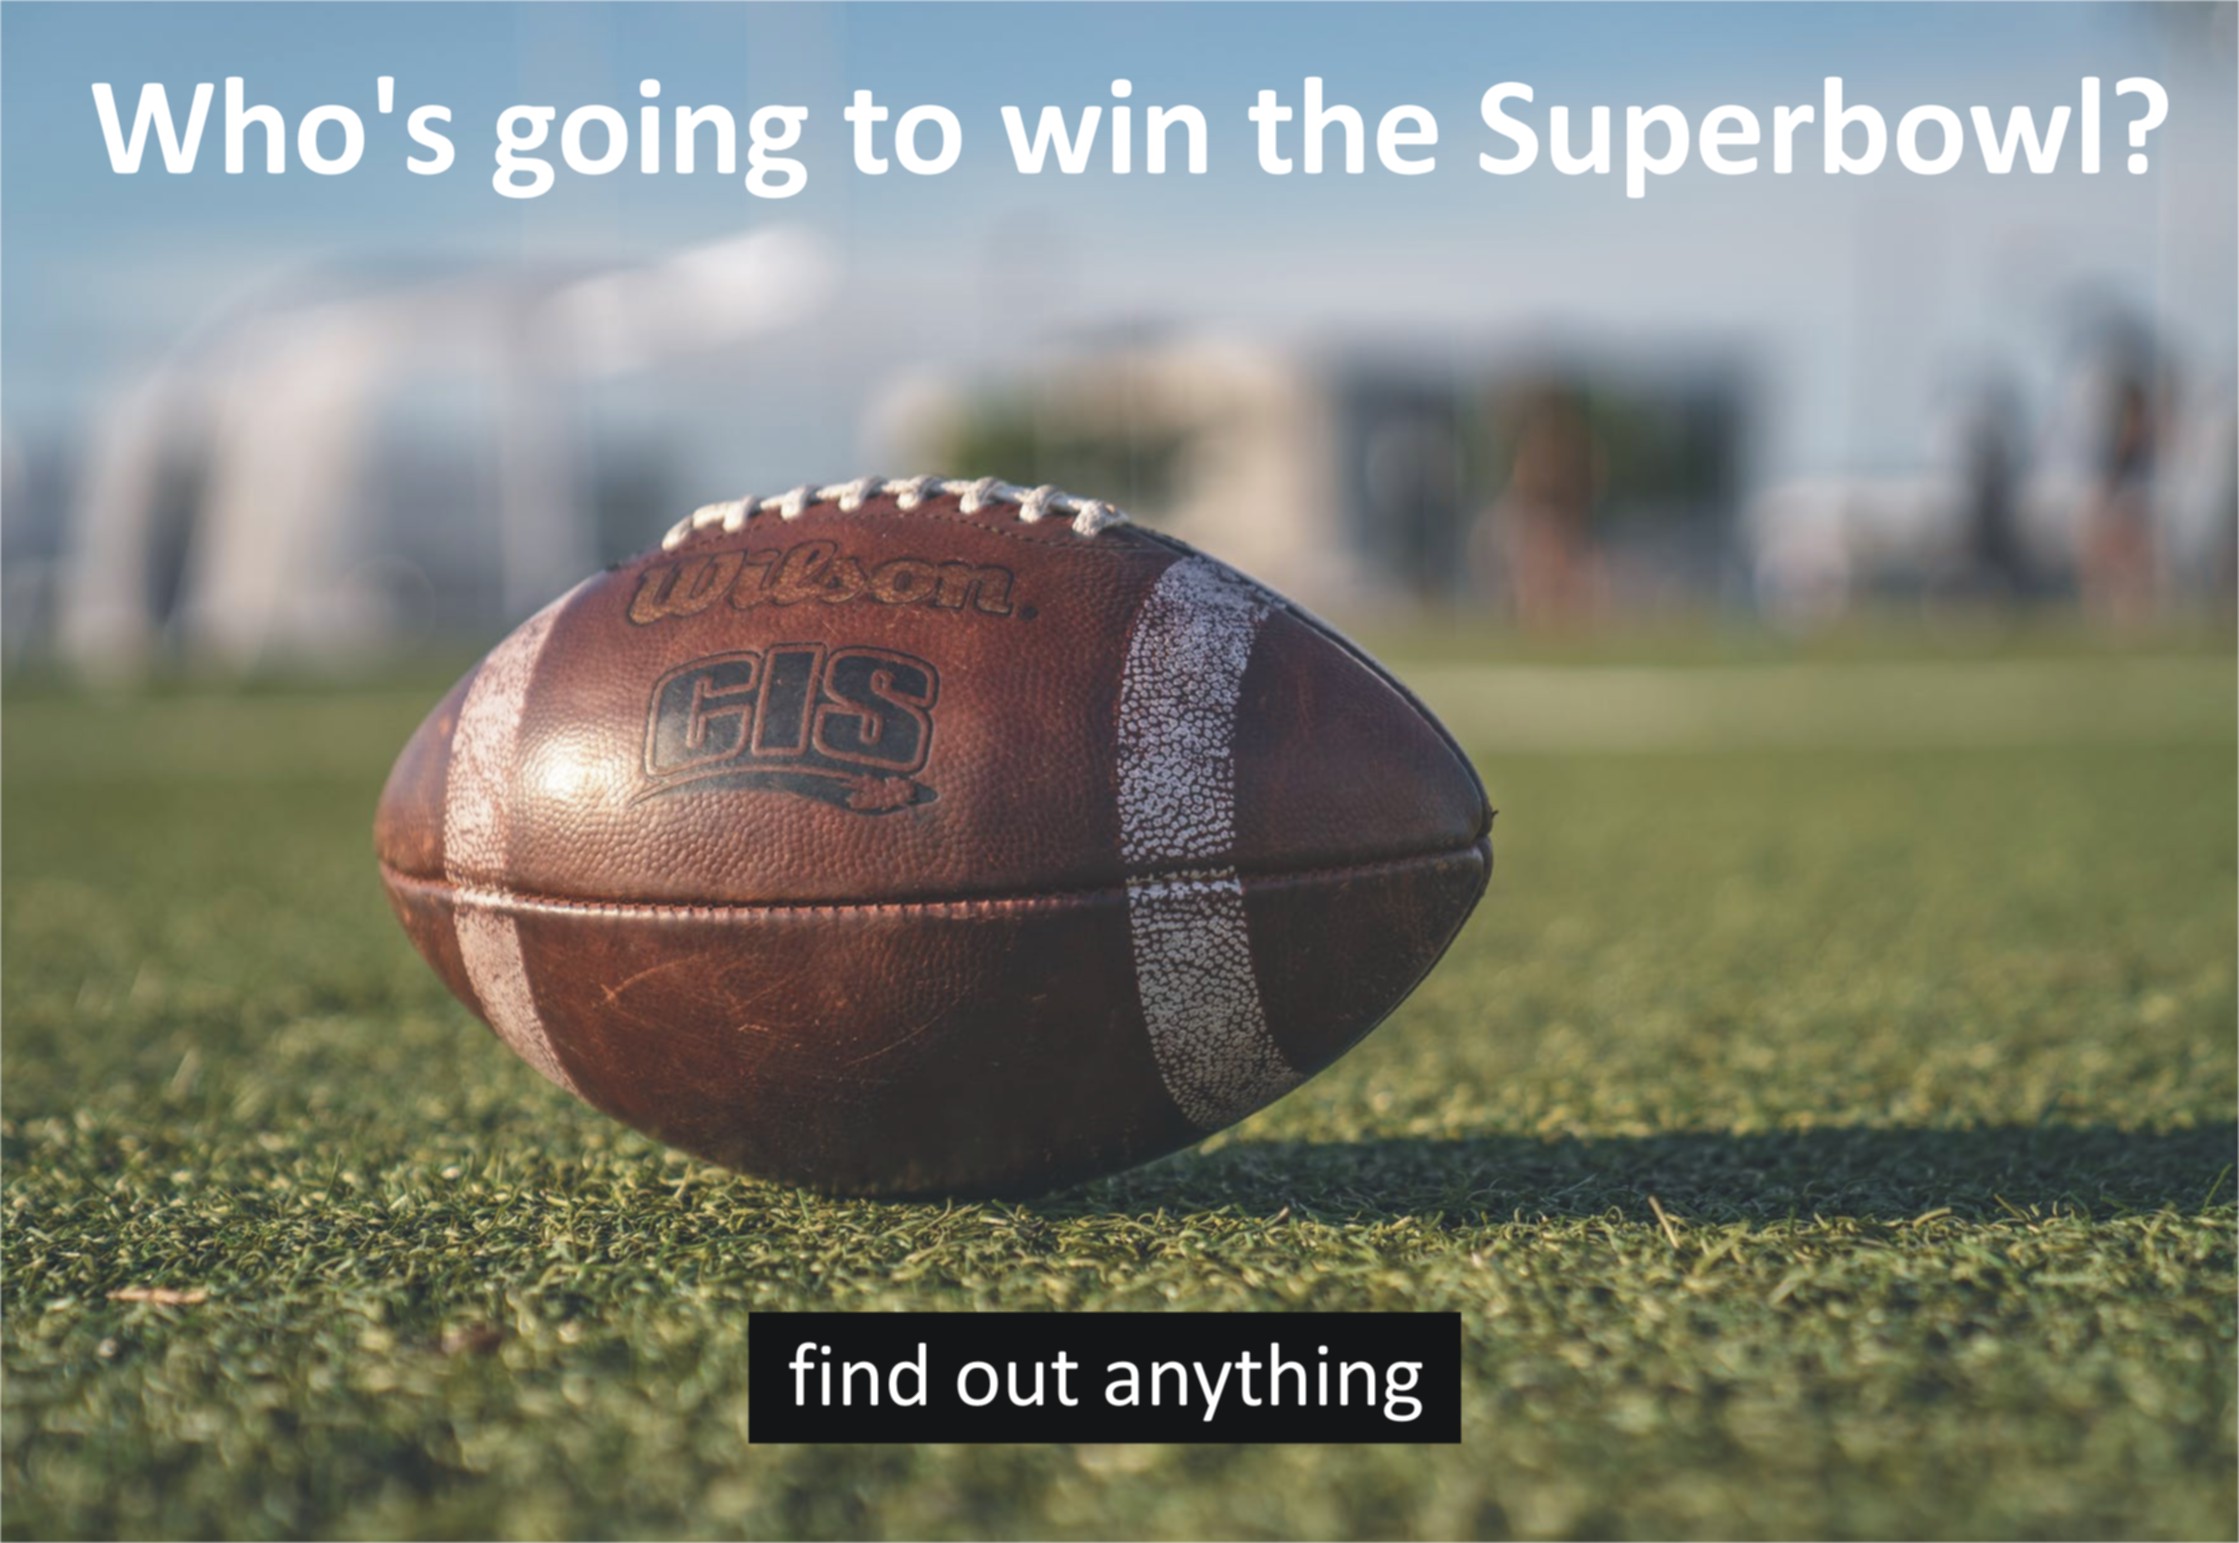 Who is going to win the next Superbowl?